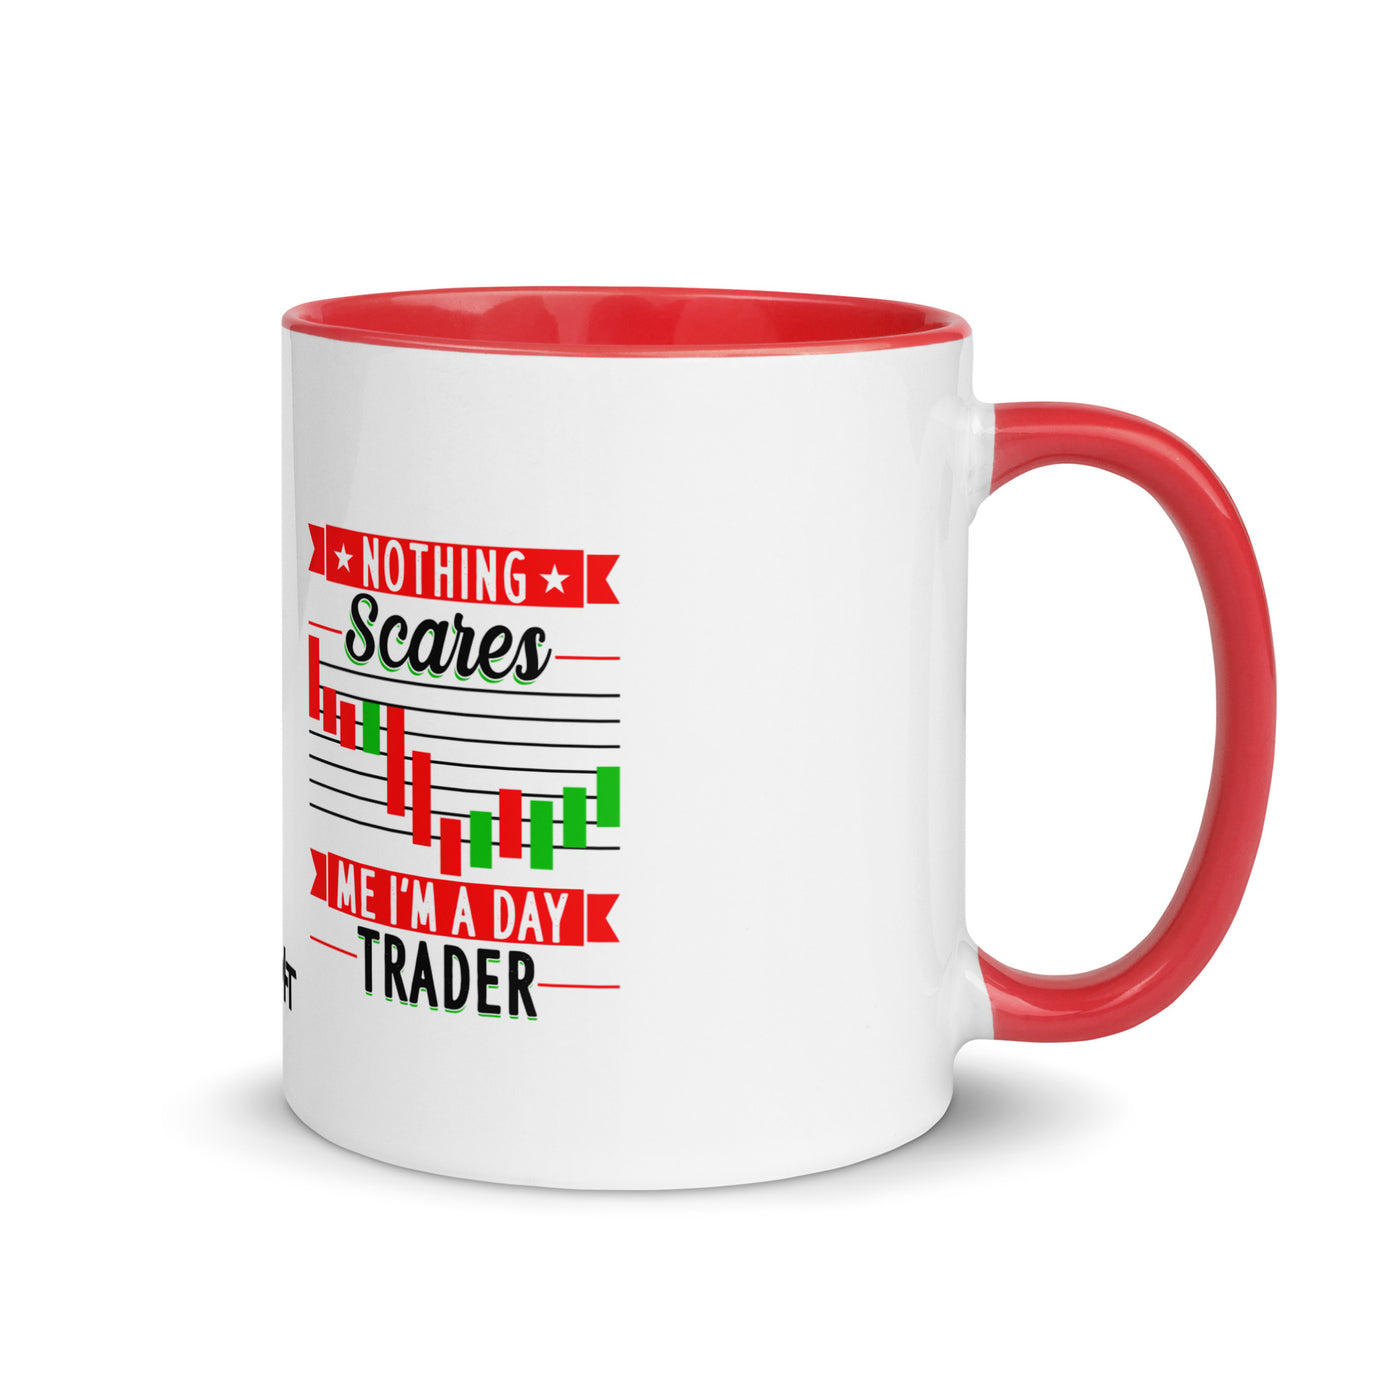 Nothing Scares me; I Am a Day Trader in Dark Text - Mug with Color Inside